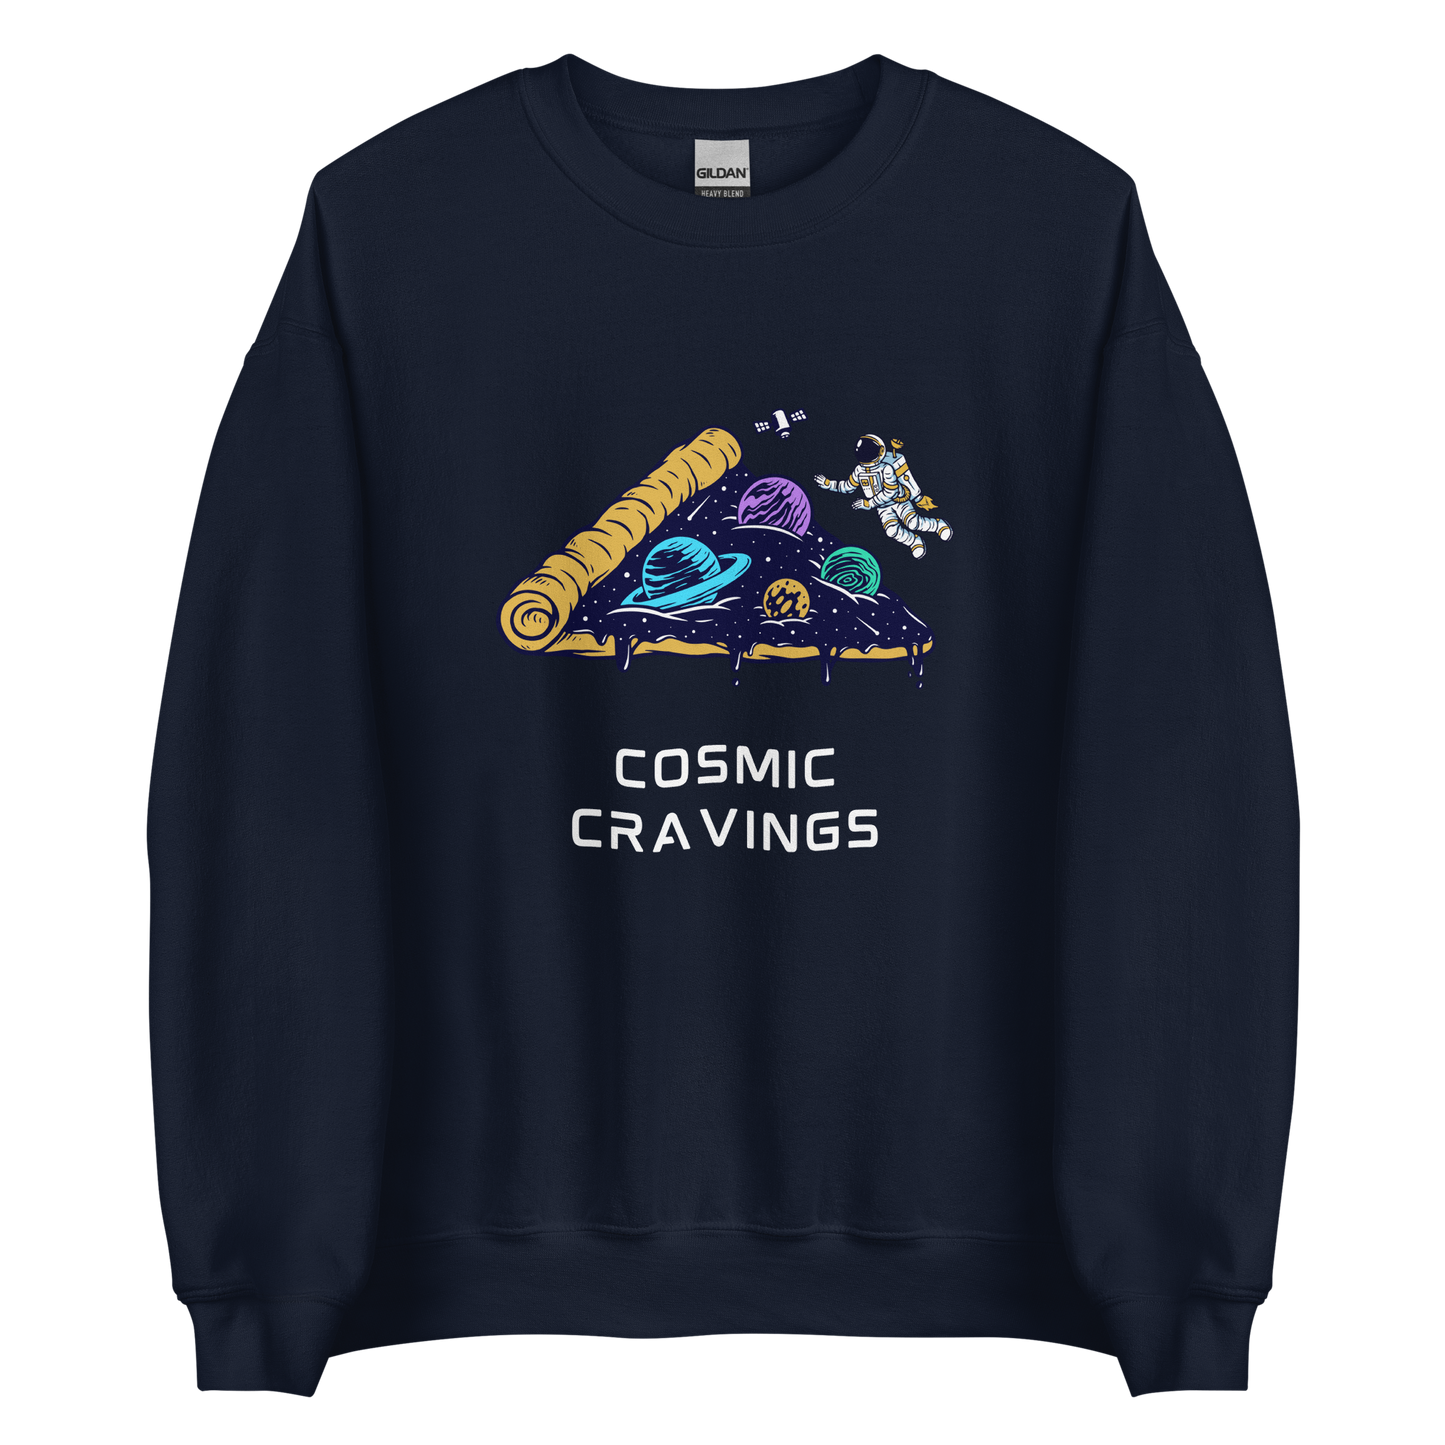 Navy Cosmic Cravings Sweatshirt featuring an Astronaut Exploring a Pizza Universe graphic on the chest - Funny Graphic Space Sweatshirts - Boozy Fox